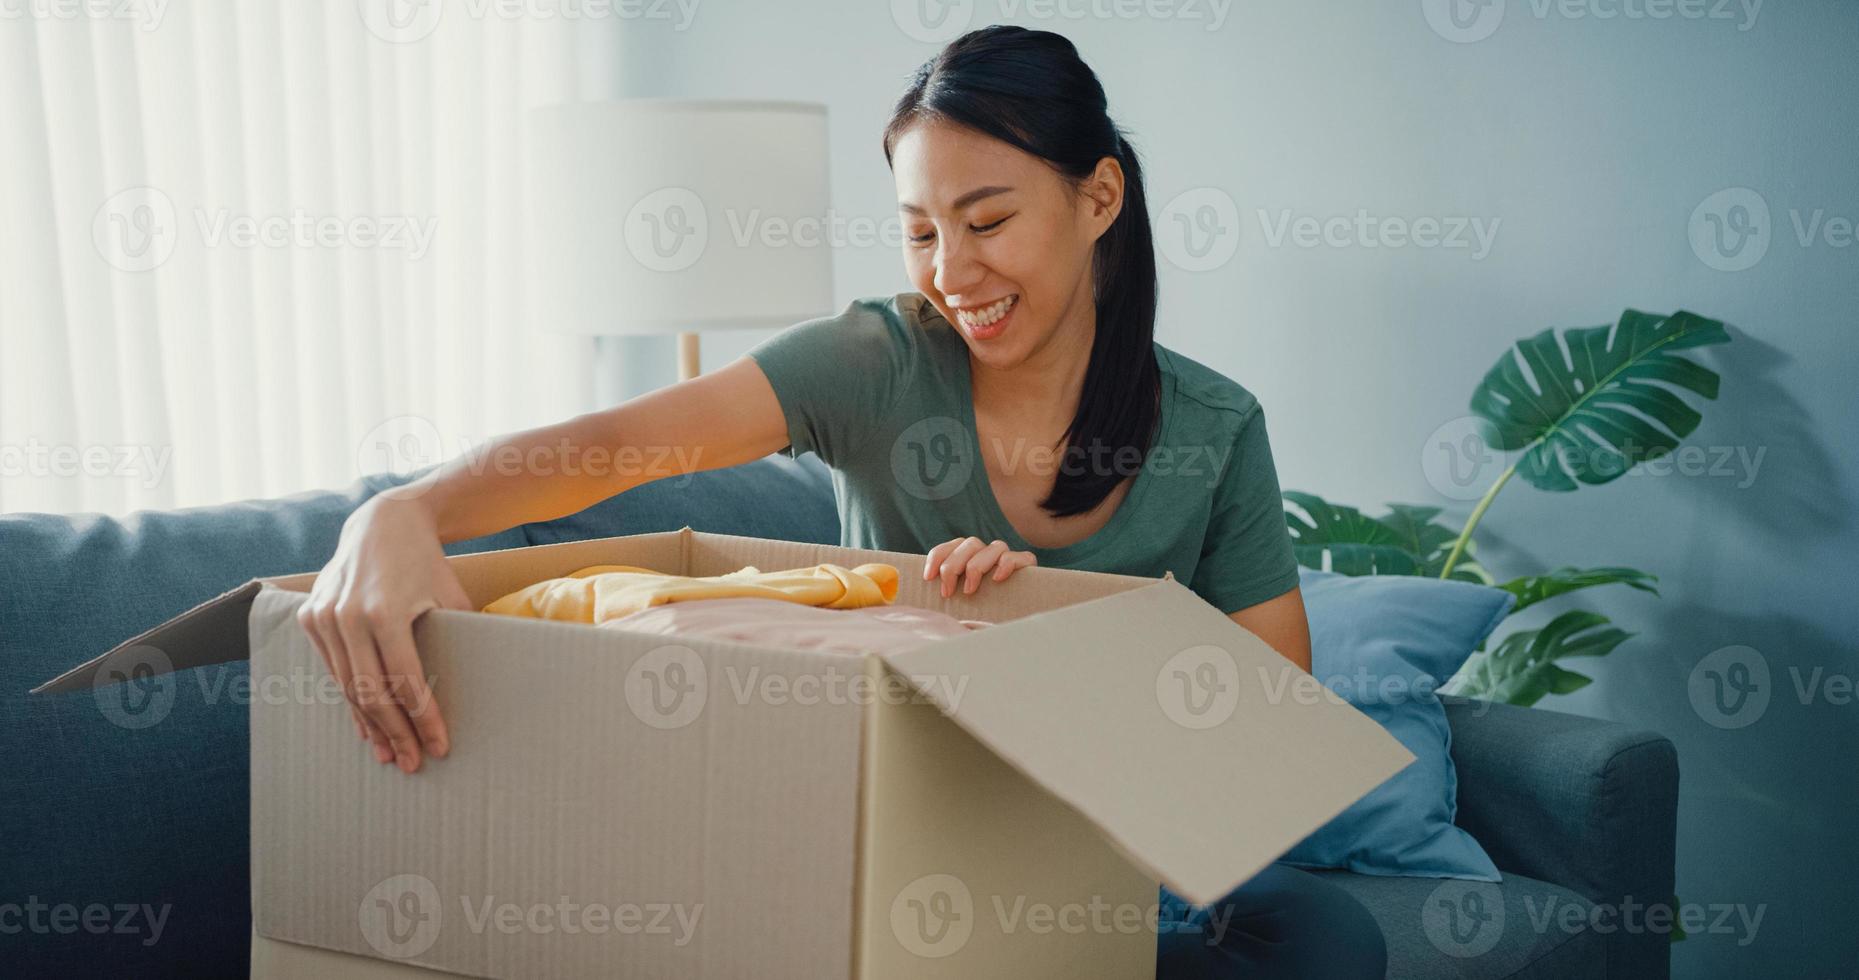 Happy asia lady open cardboard box package exciting and enjoy trying and matching with quality of fashion cloth product from online market in living room at home. Online shopping and delivery concept. photo